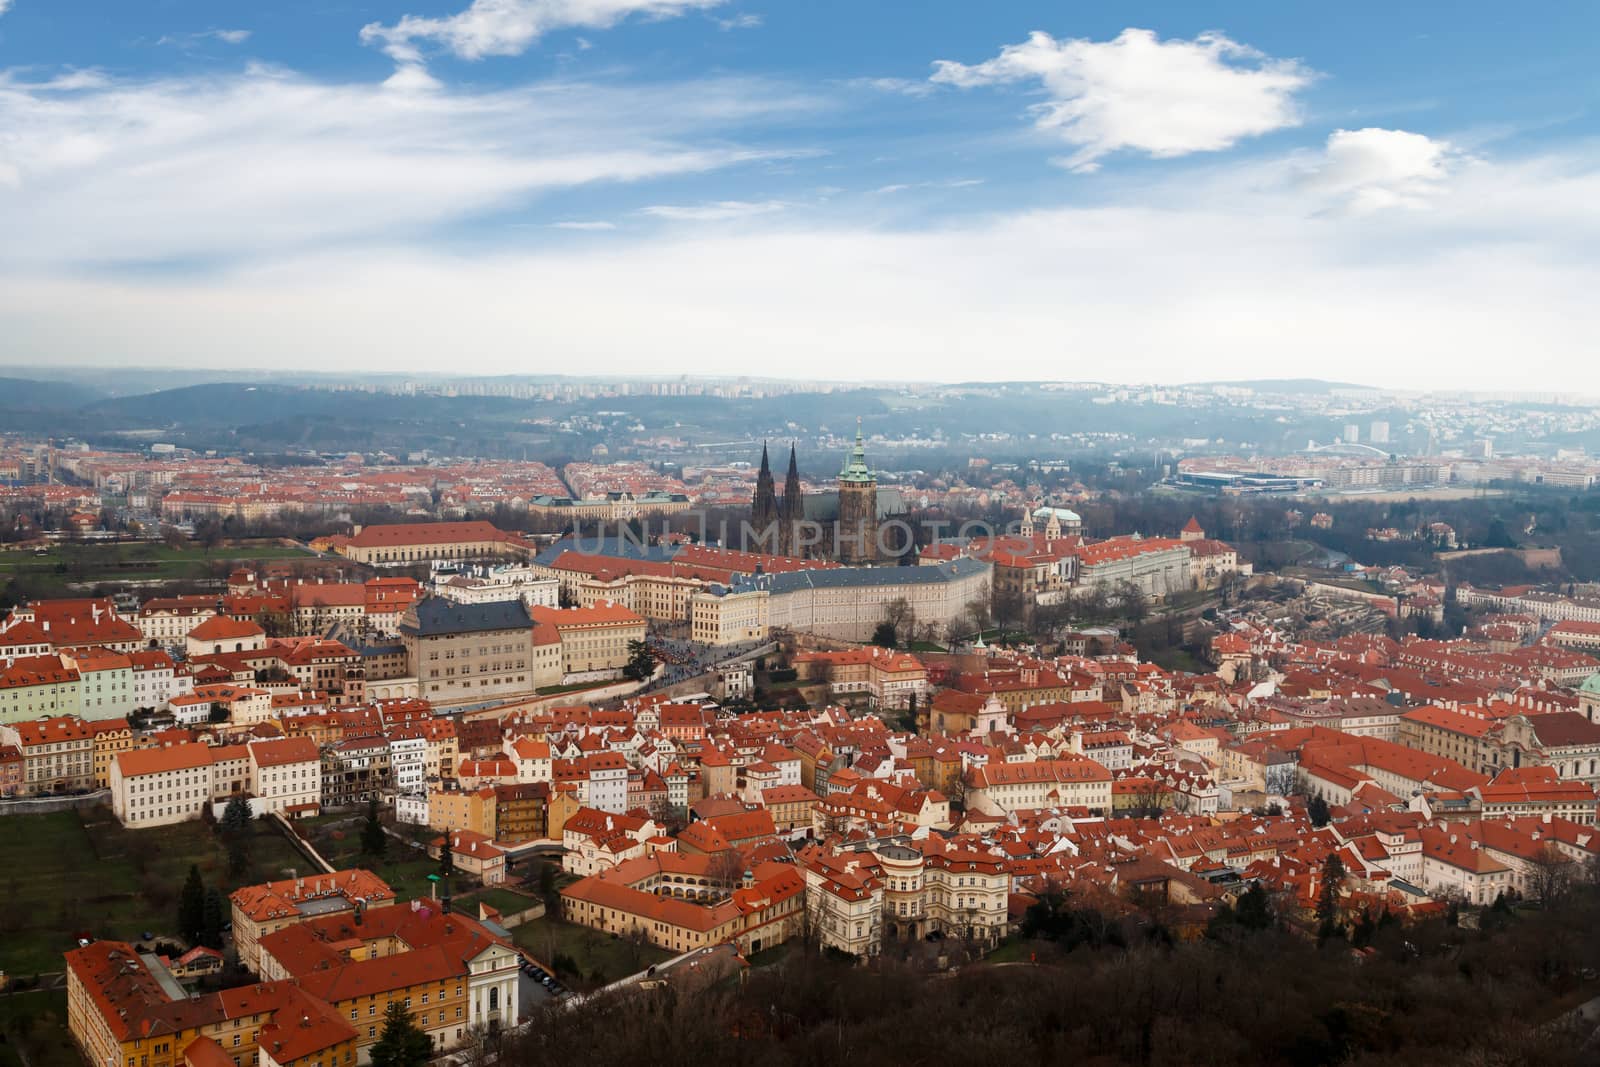 General top view of historical gothic Prague cityscape with old buildings and towers around, on cloudy sky background.